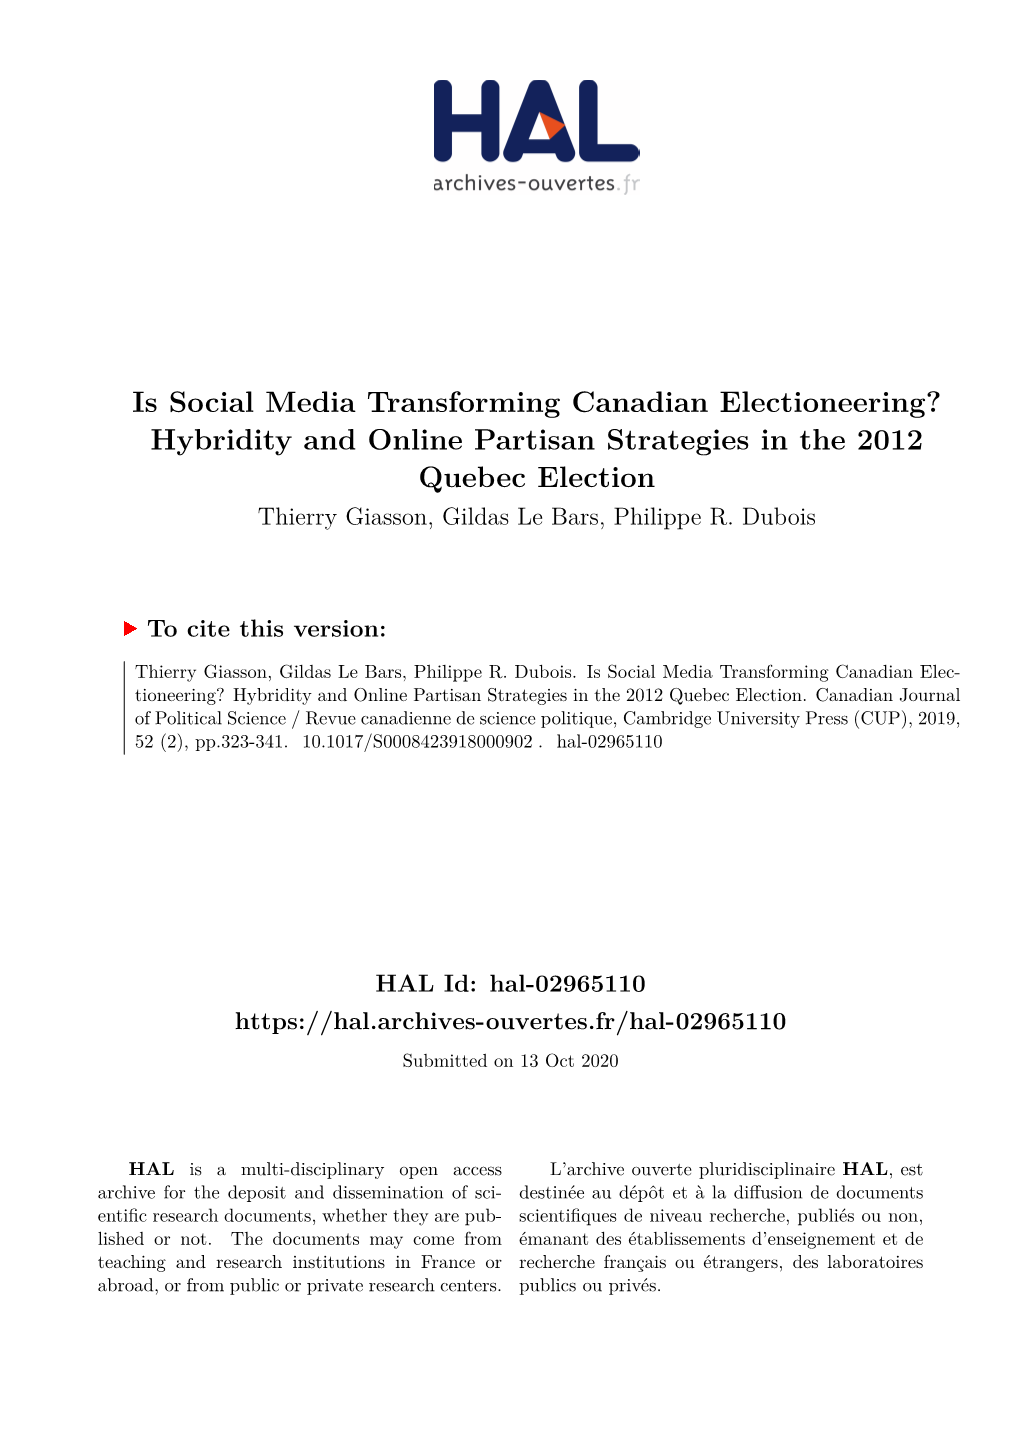 Is Social Media Transforming Canadian Electioneering? Hybridity and Online Partisan Strategies in the 2012 Quebec Election Thierry Giasson, Gildas Le Bars, Philippe R